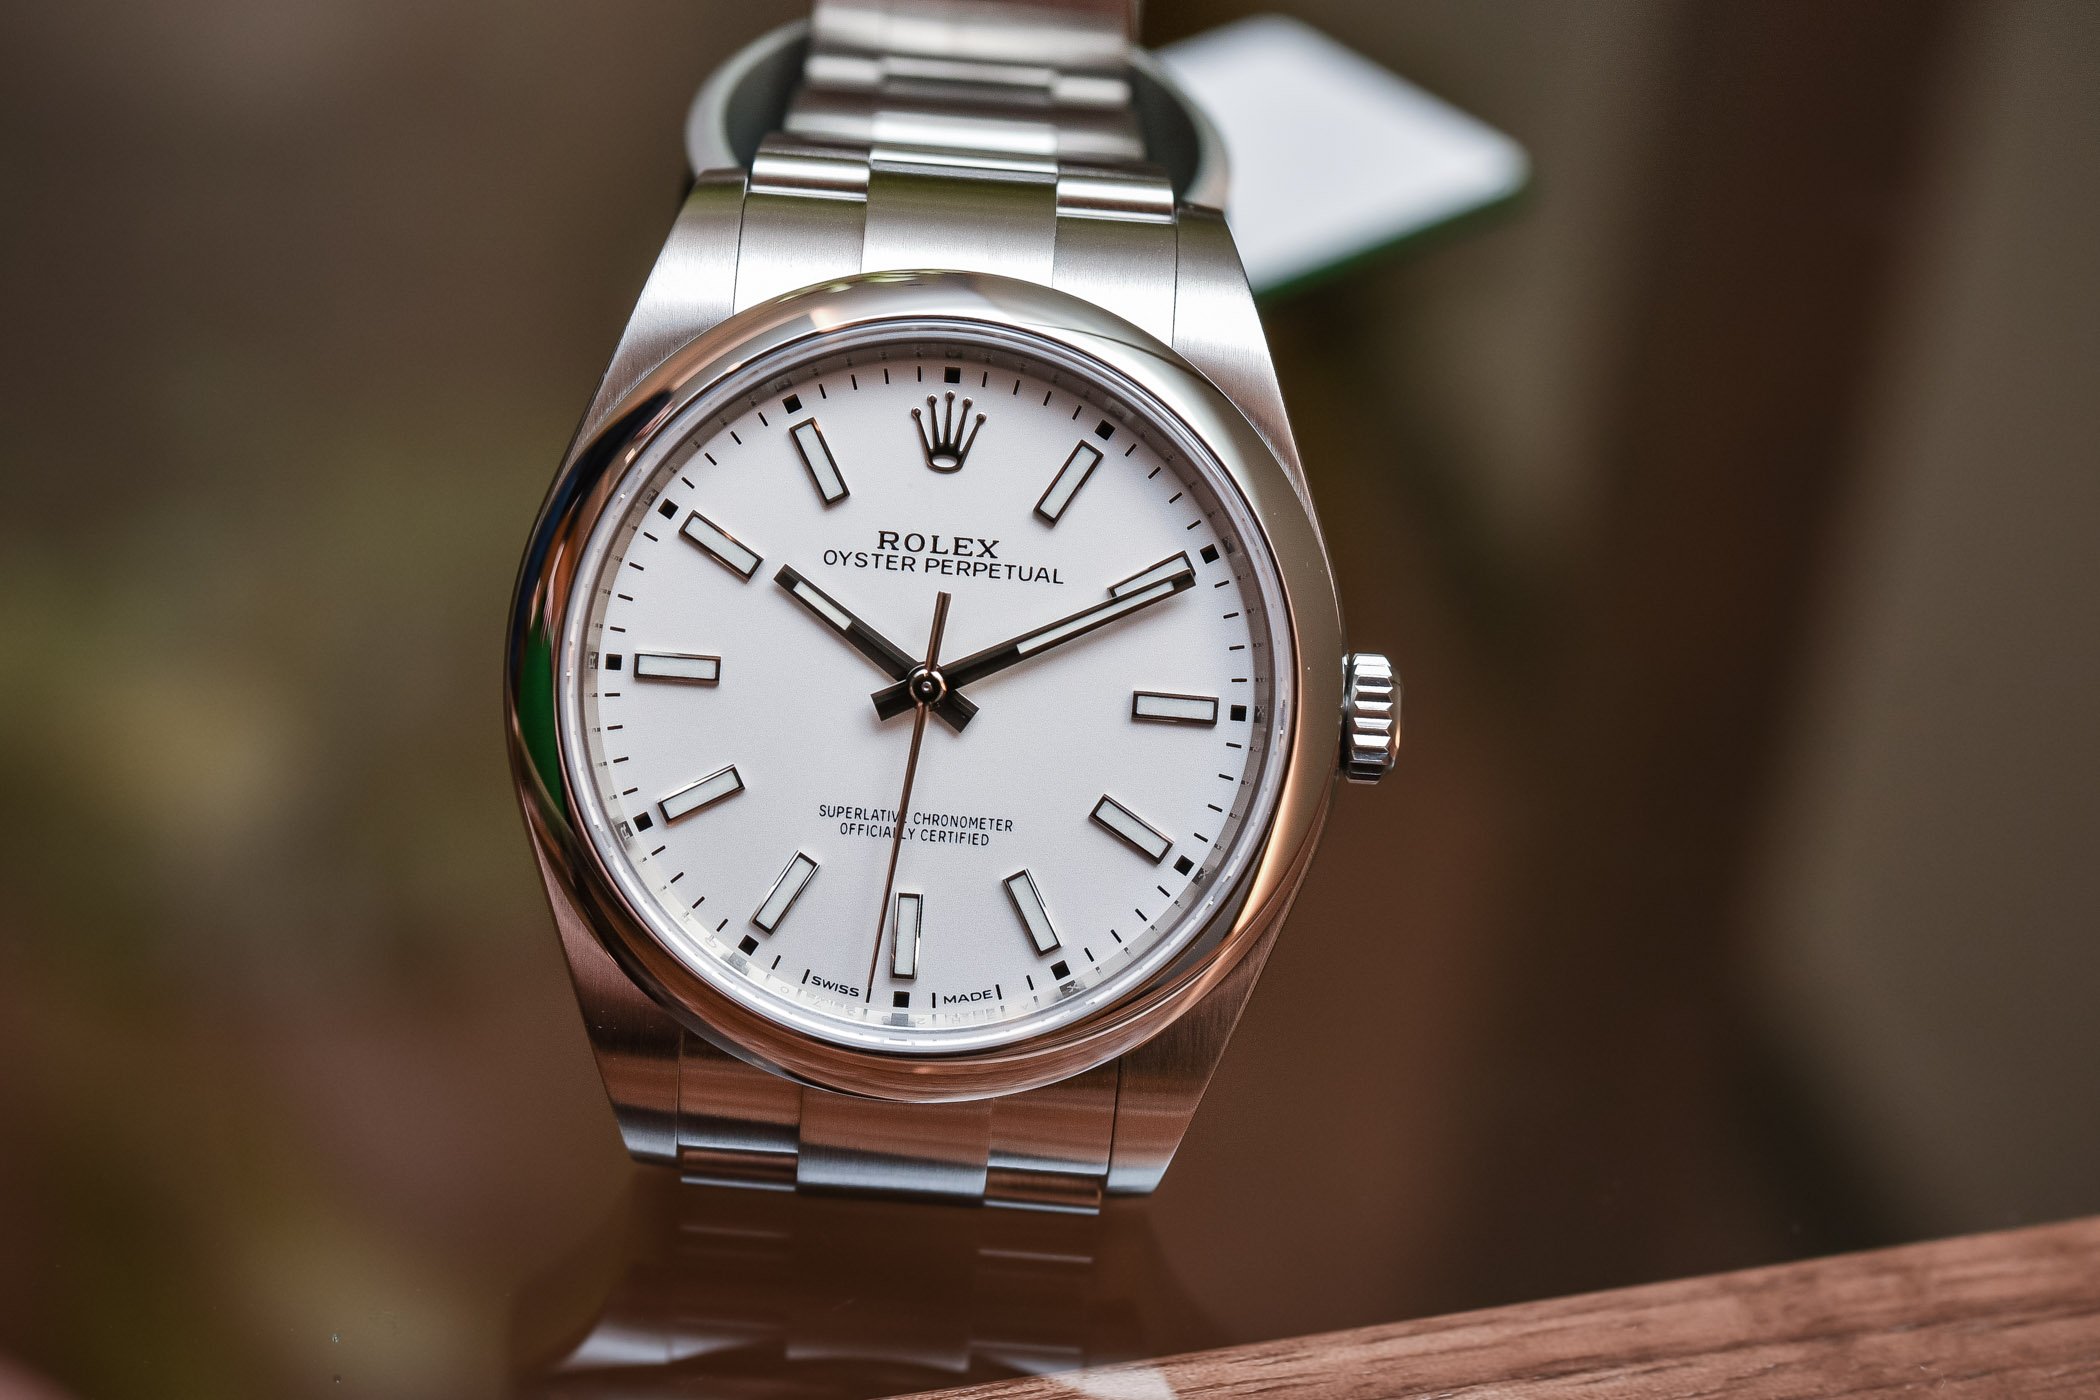 Rolex oyster perpetual value